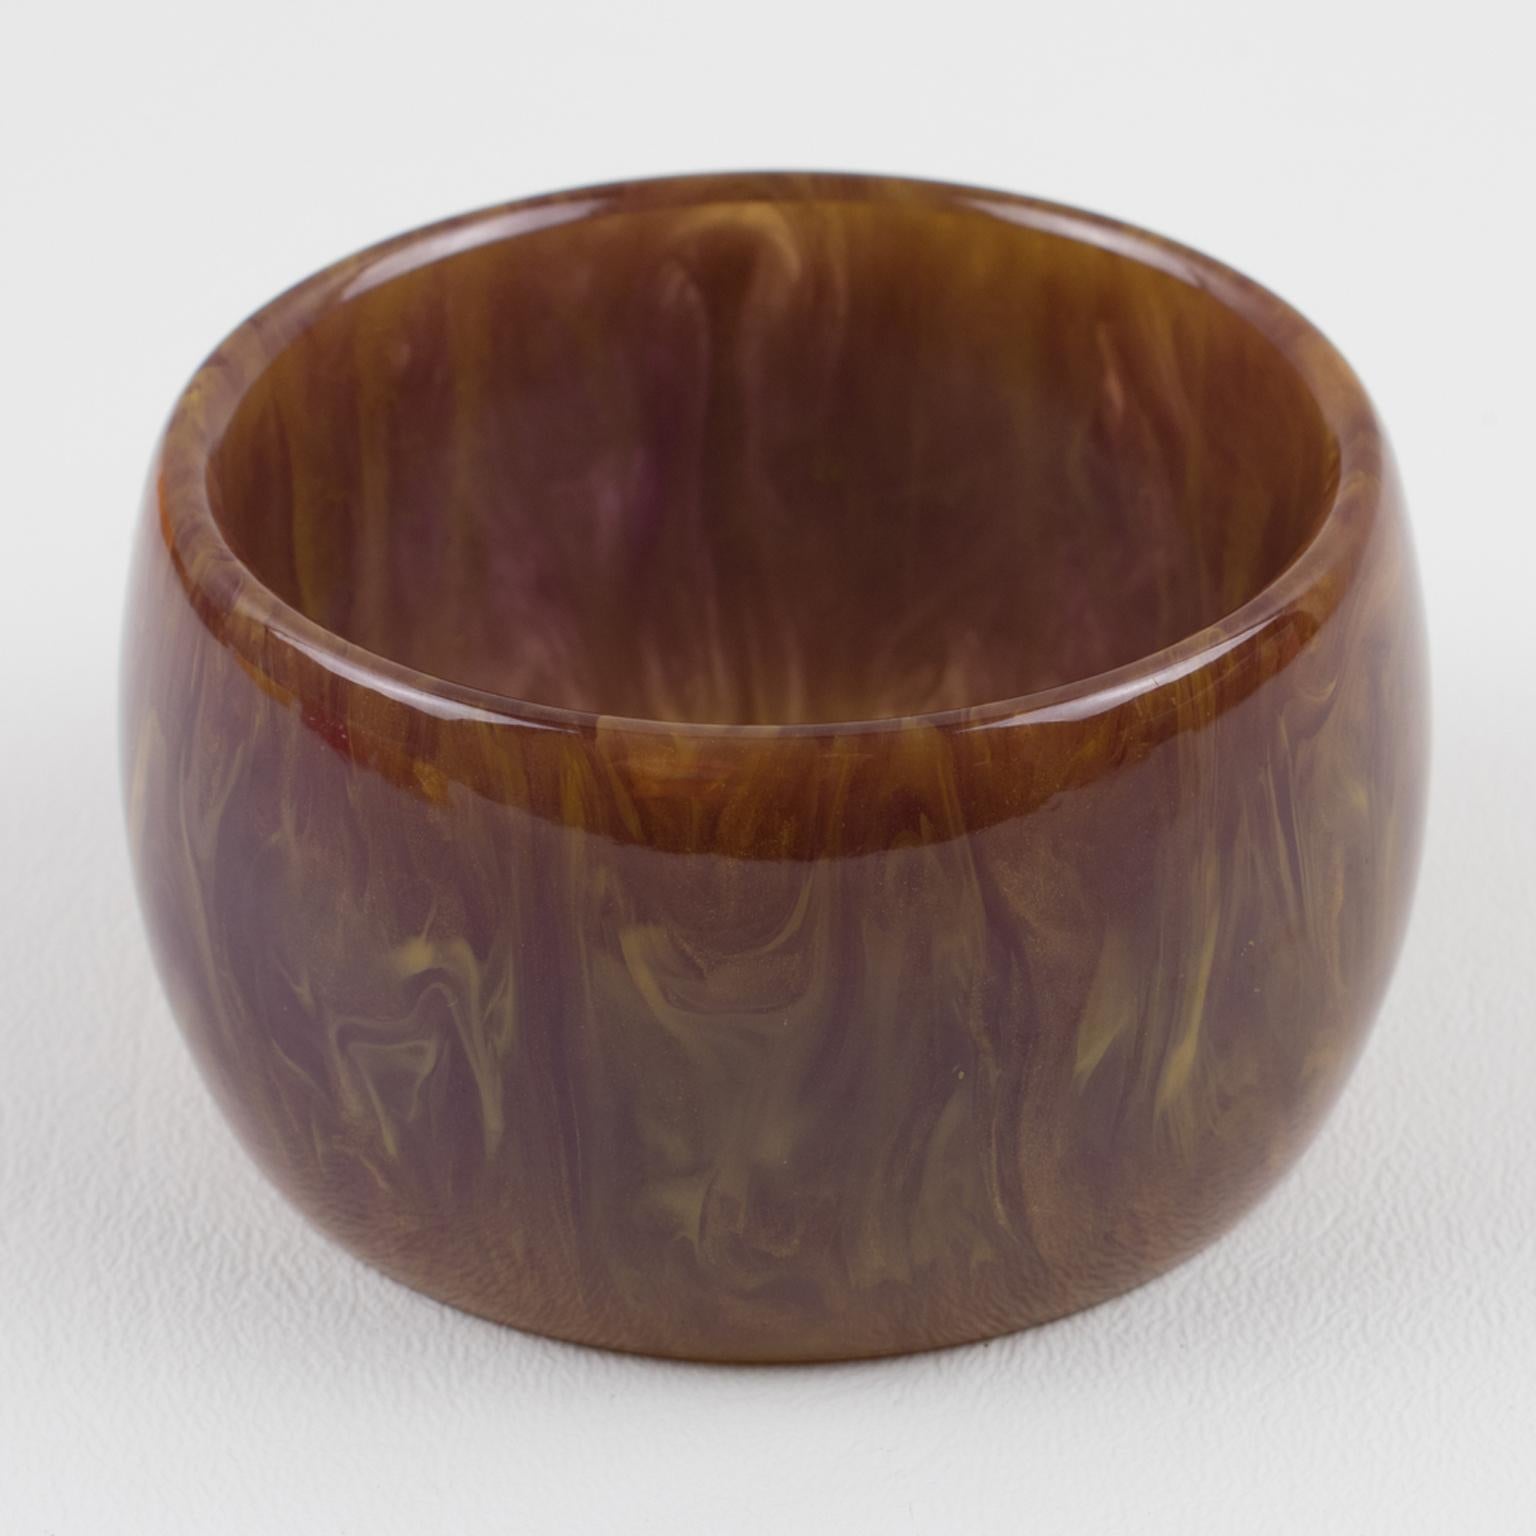 Stunning purple stardust marble Bakelite bracelet bangle. Oversized wide domed shape. Intense purple marble tone with gold flakes inclusions and white swirling. 
Measurements: Inside across is 2.50 in. diameter (6.4 cm) - outside across is 3 in.